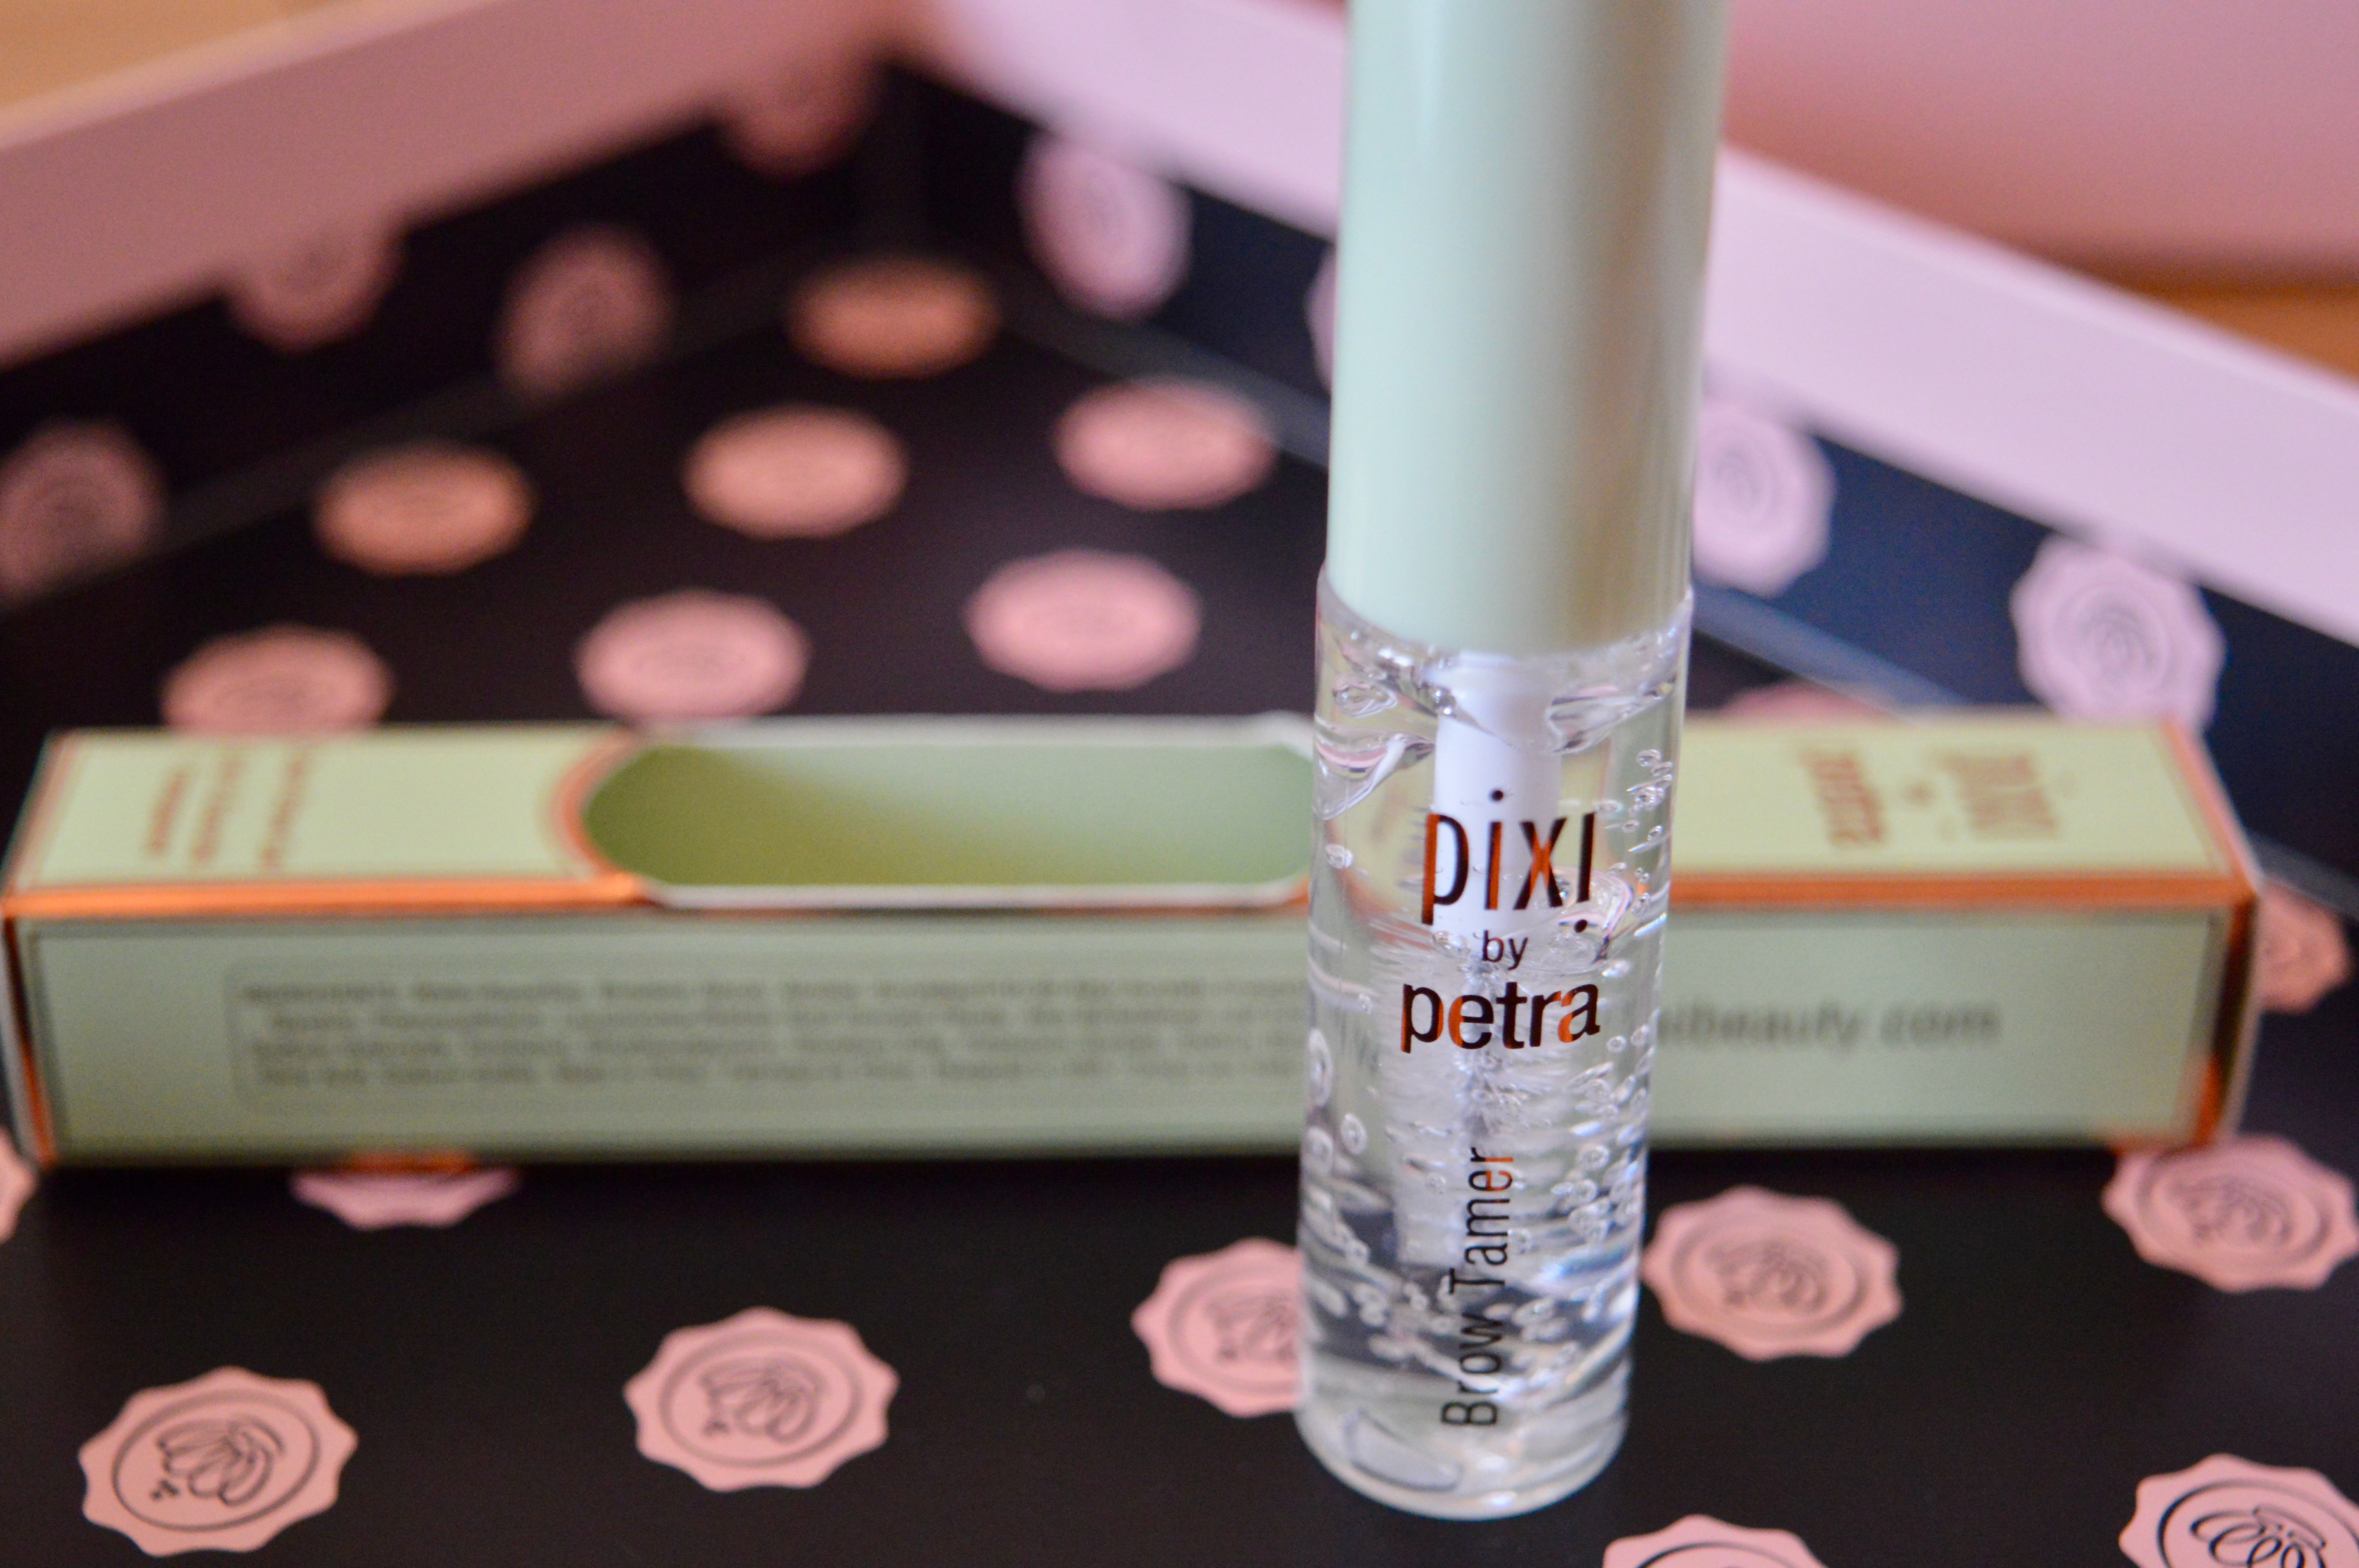 pixi-by-petra-brow-tamer-september-glossybox-beauty-subscription-box-elle-blonde-luxury-lifestyle-destination